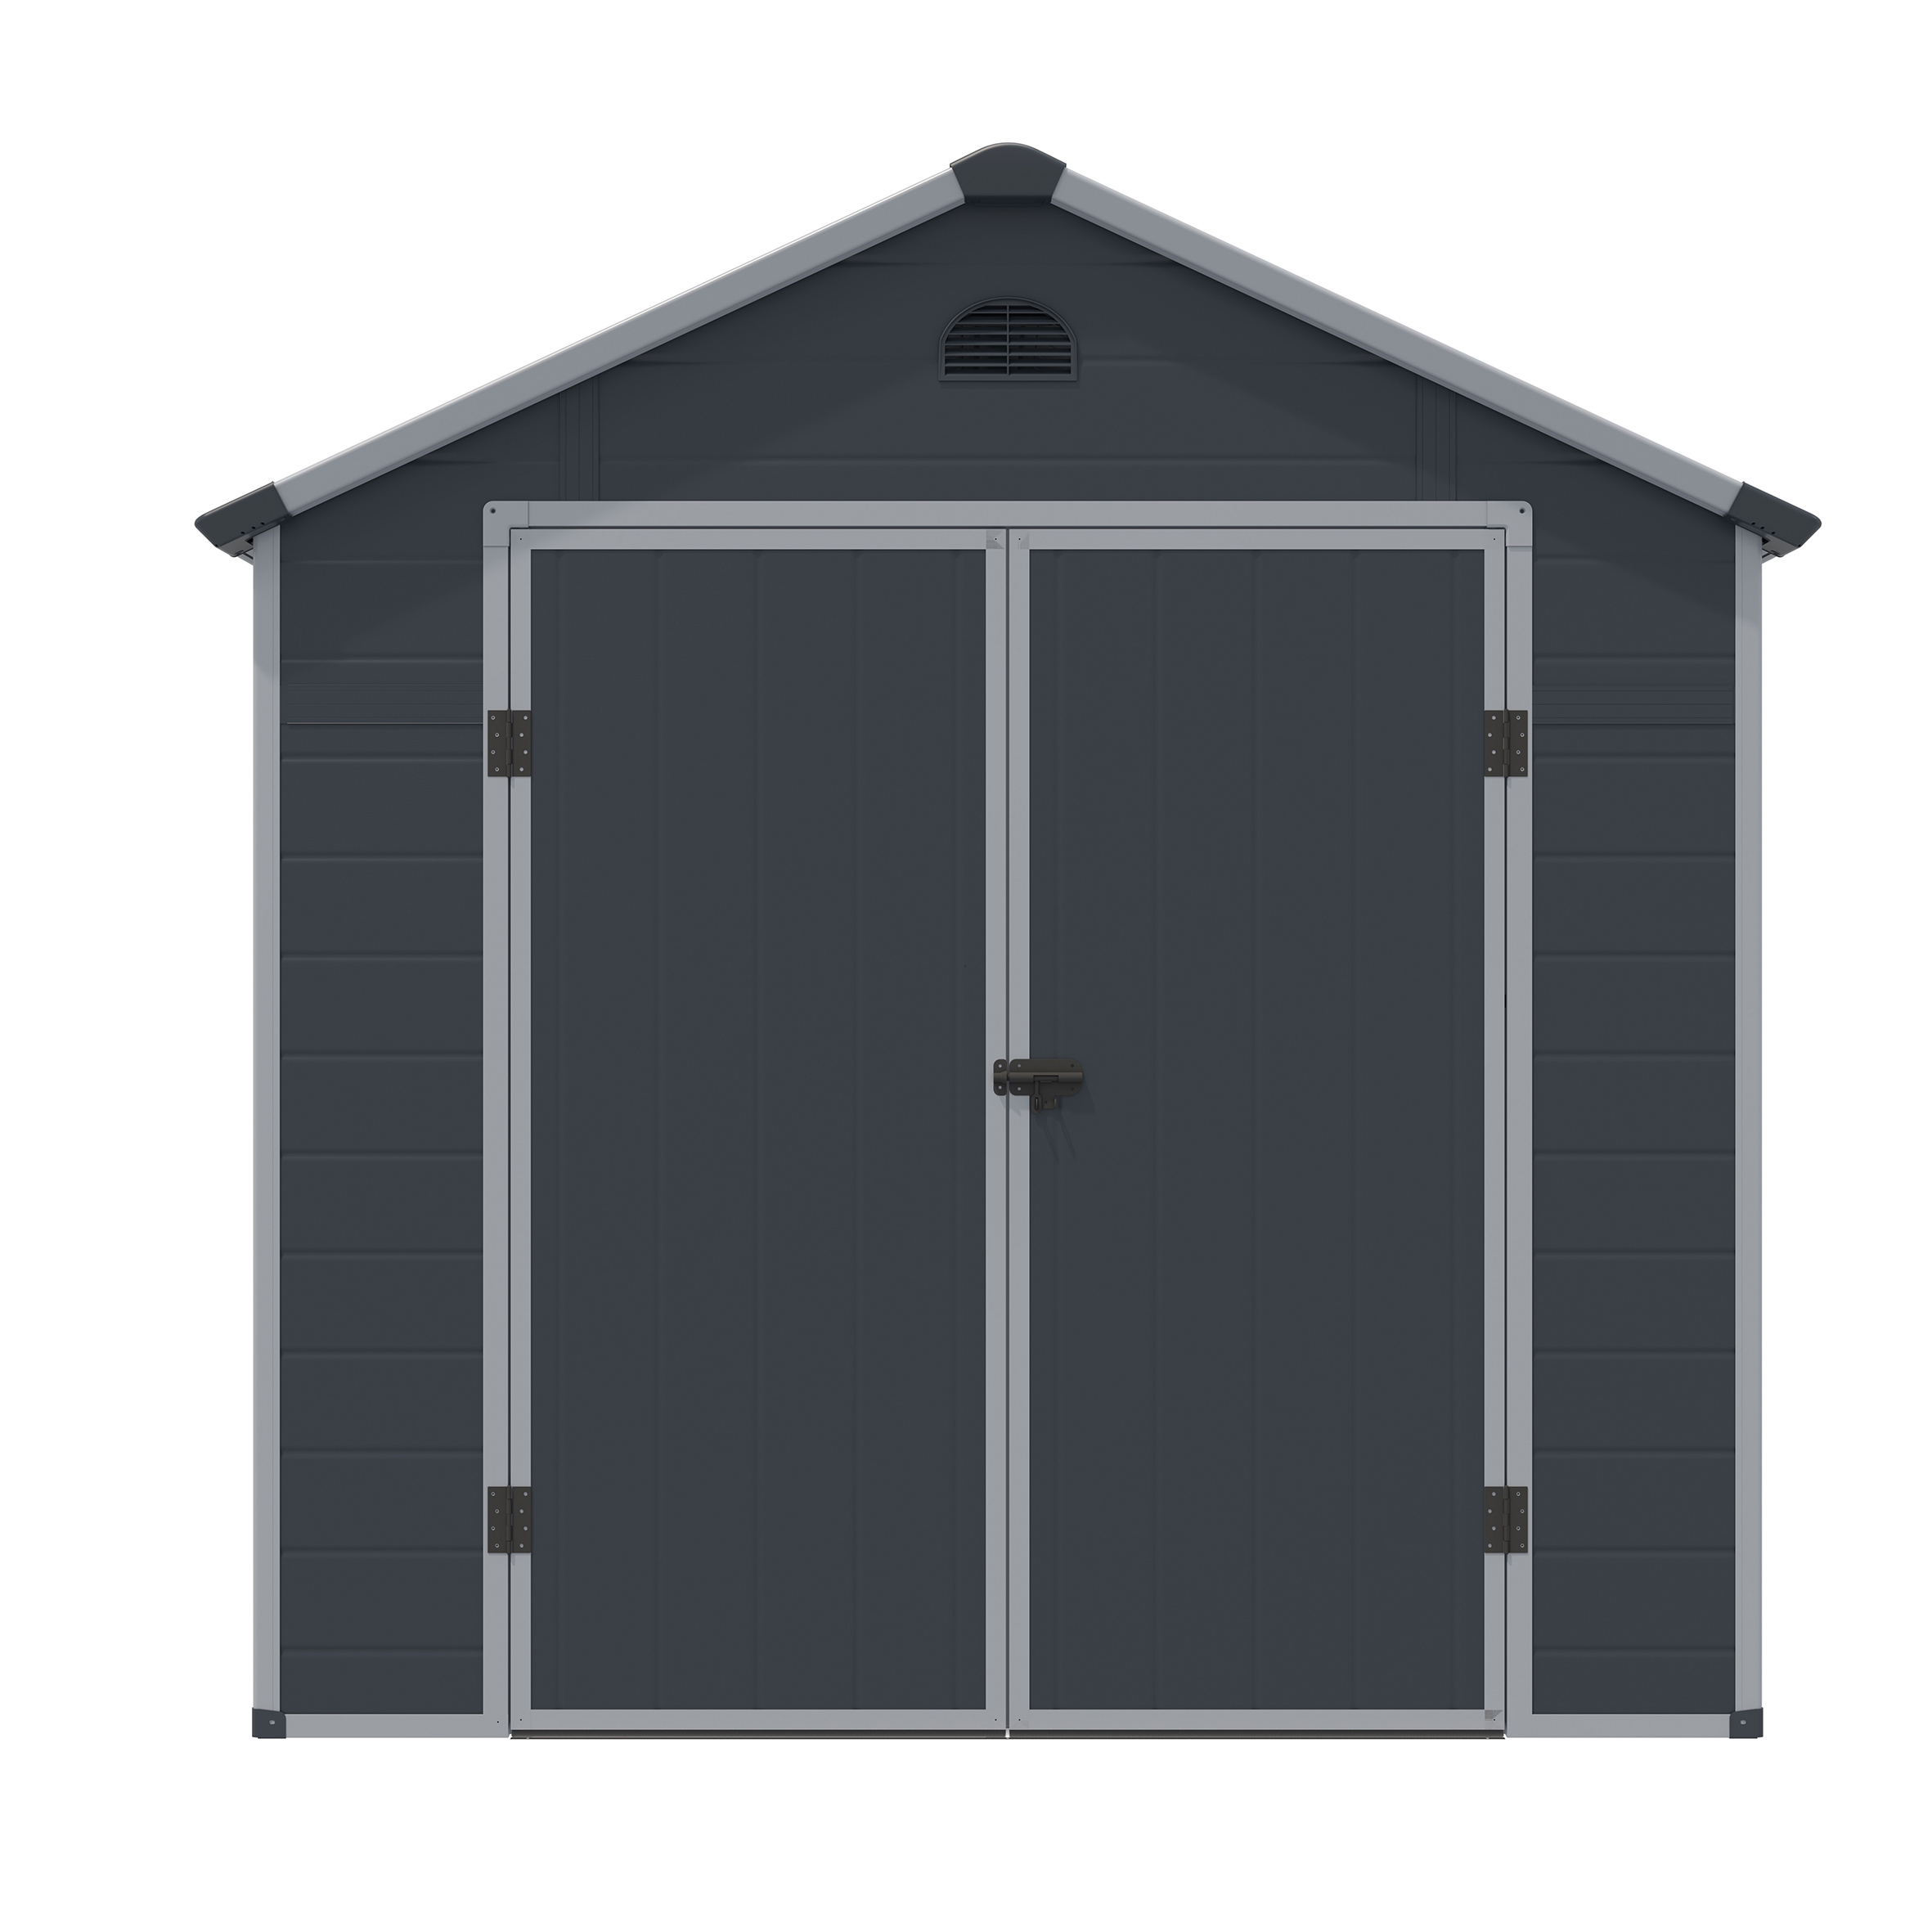 Featured image for “RGP | Airevale™ Apex Shed 8x6 (Dark Grey)”